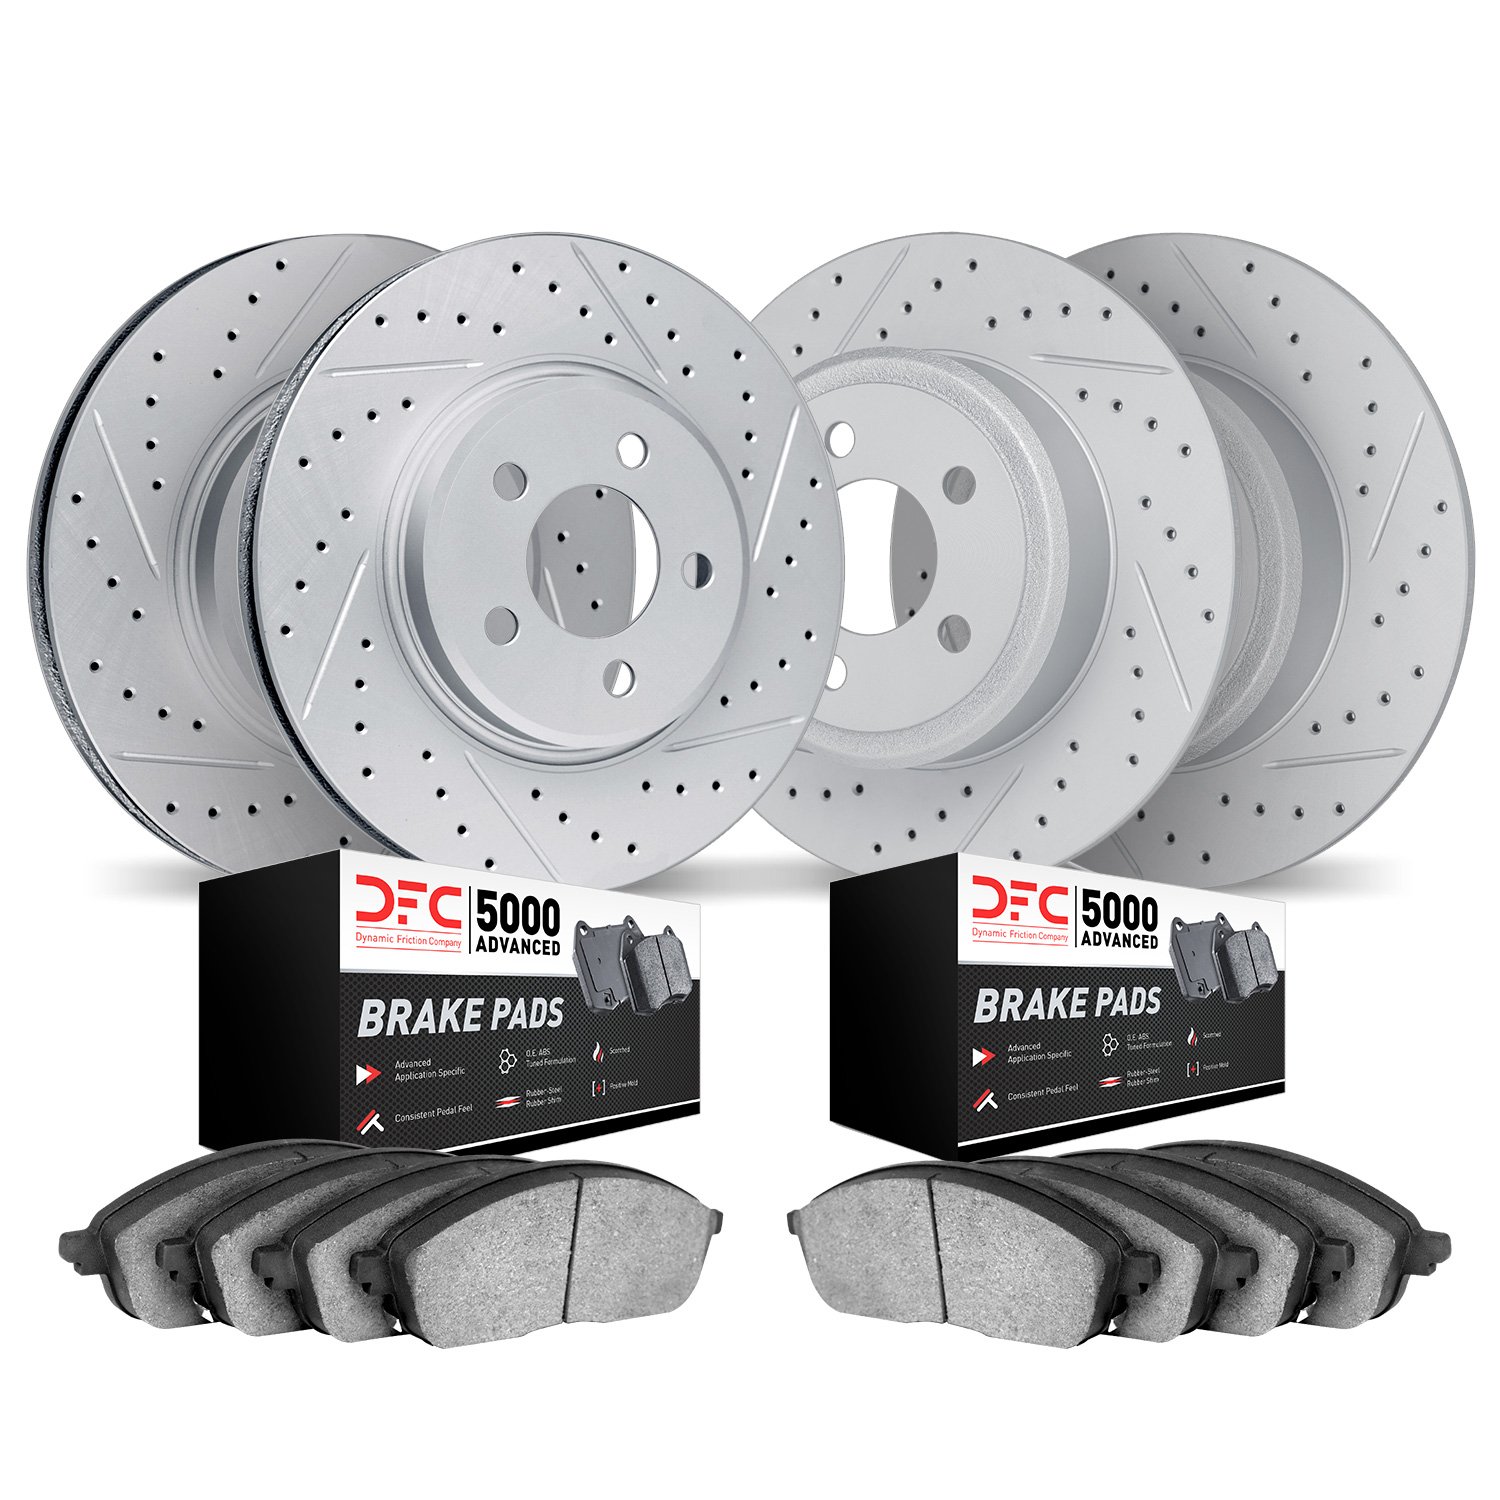 2504-13010 Geoperformance Drilled/Slotted Rotors w/5000 Advanced Brake Pads Kit, 2015-2021 Subaru, Position: Front and Rear